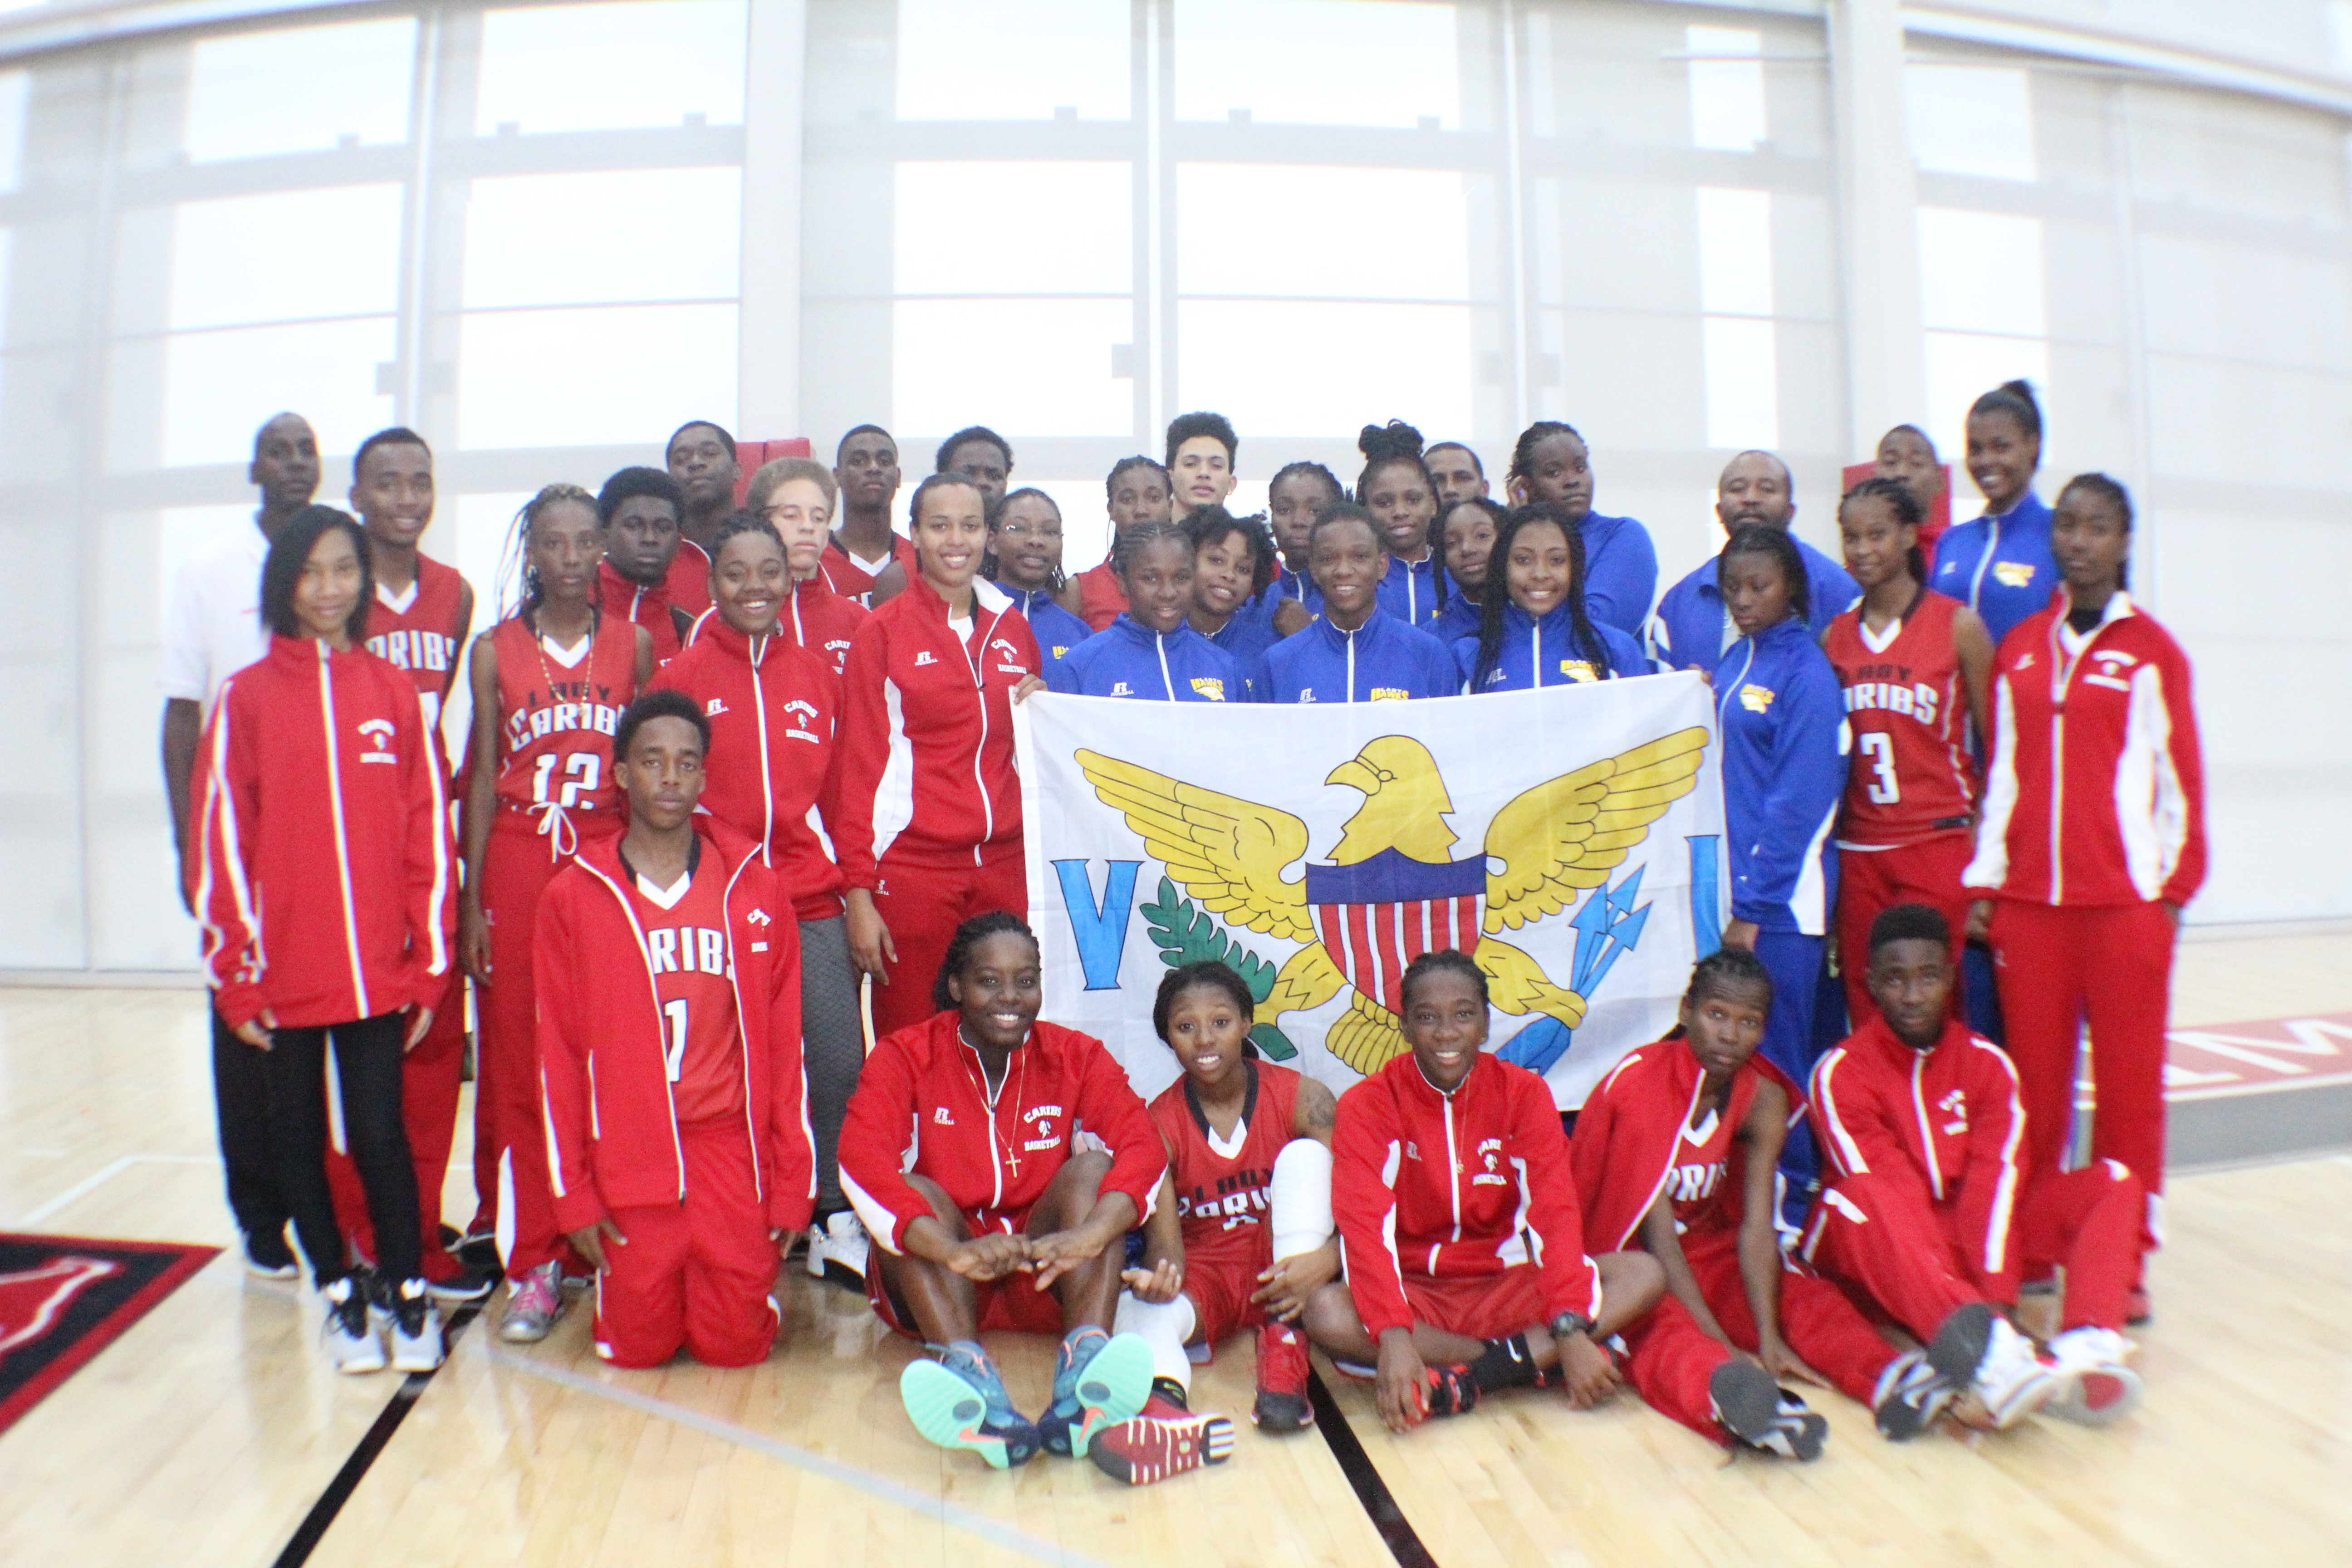 All the girls’ teams in the Christmas Tournament and the Central H.S. boys 